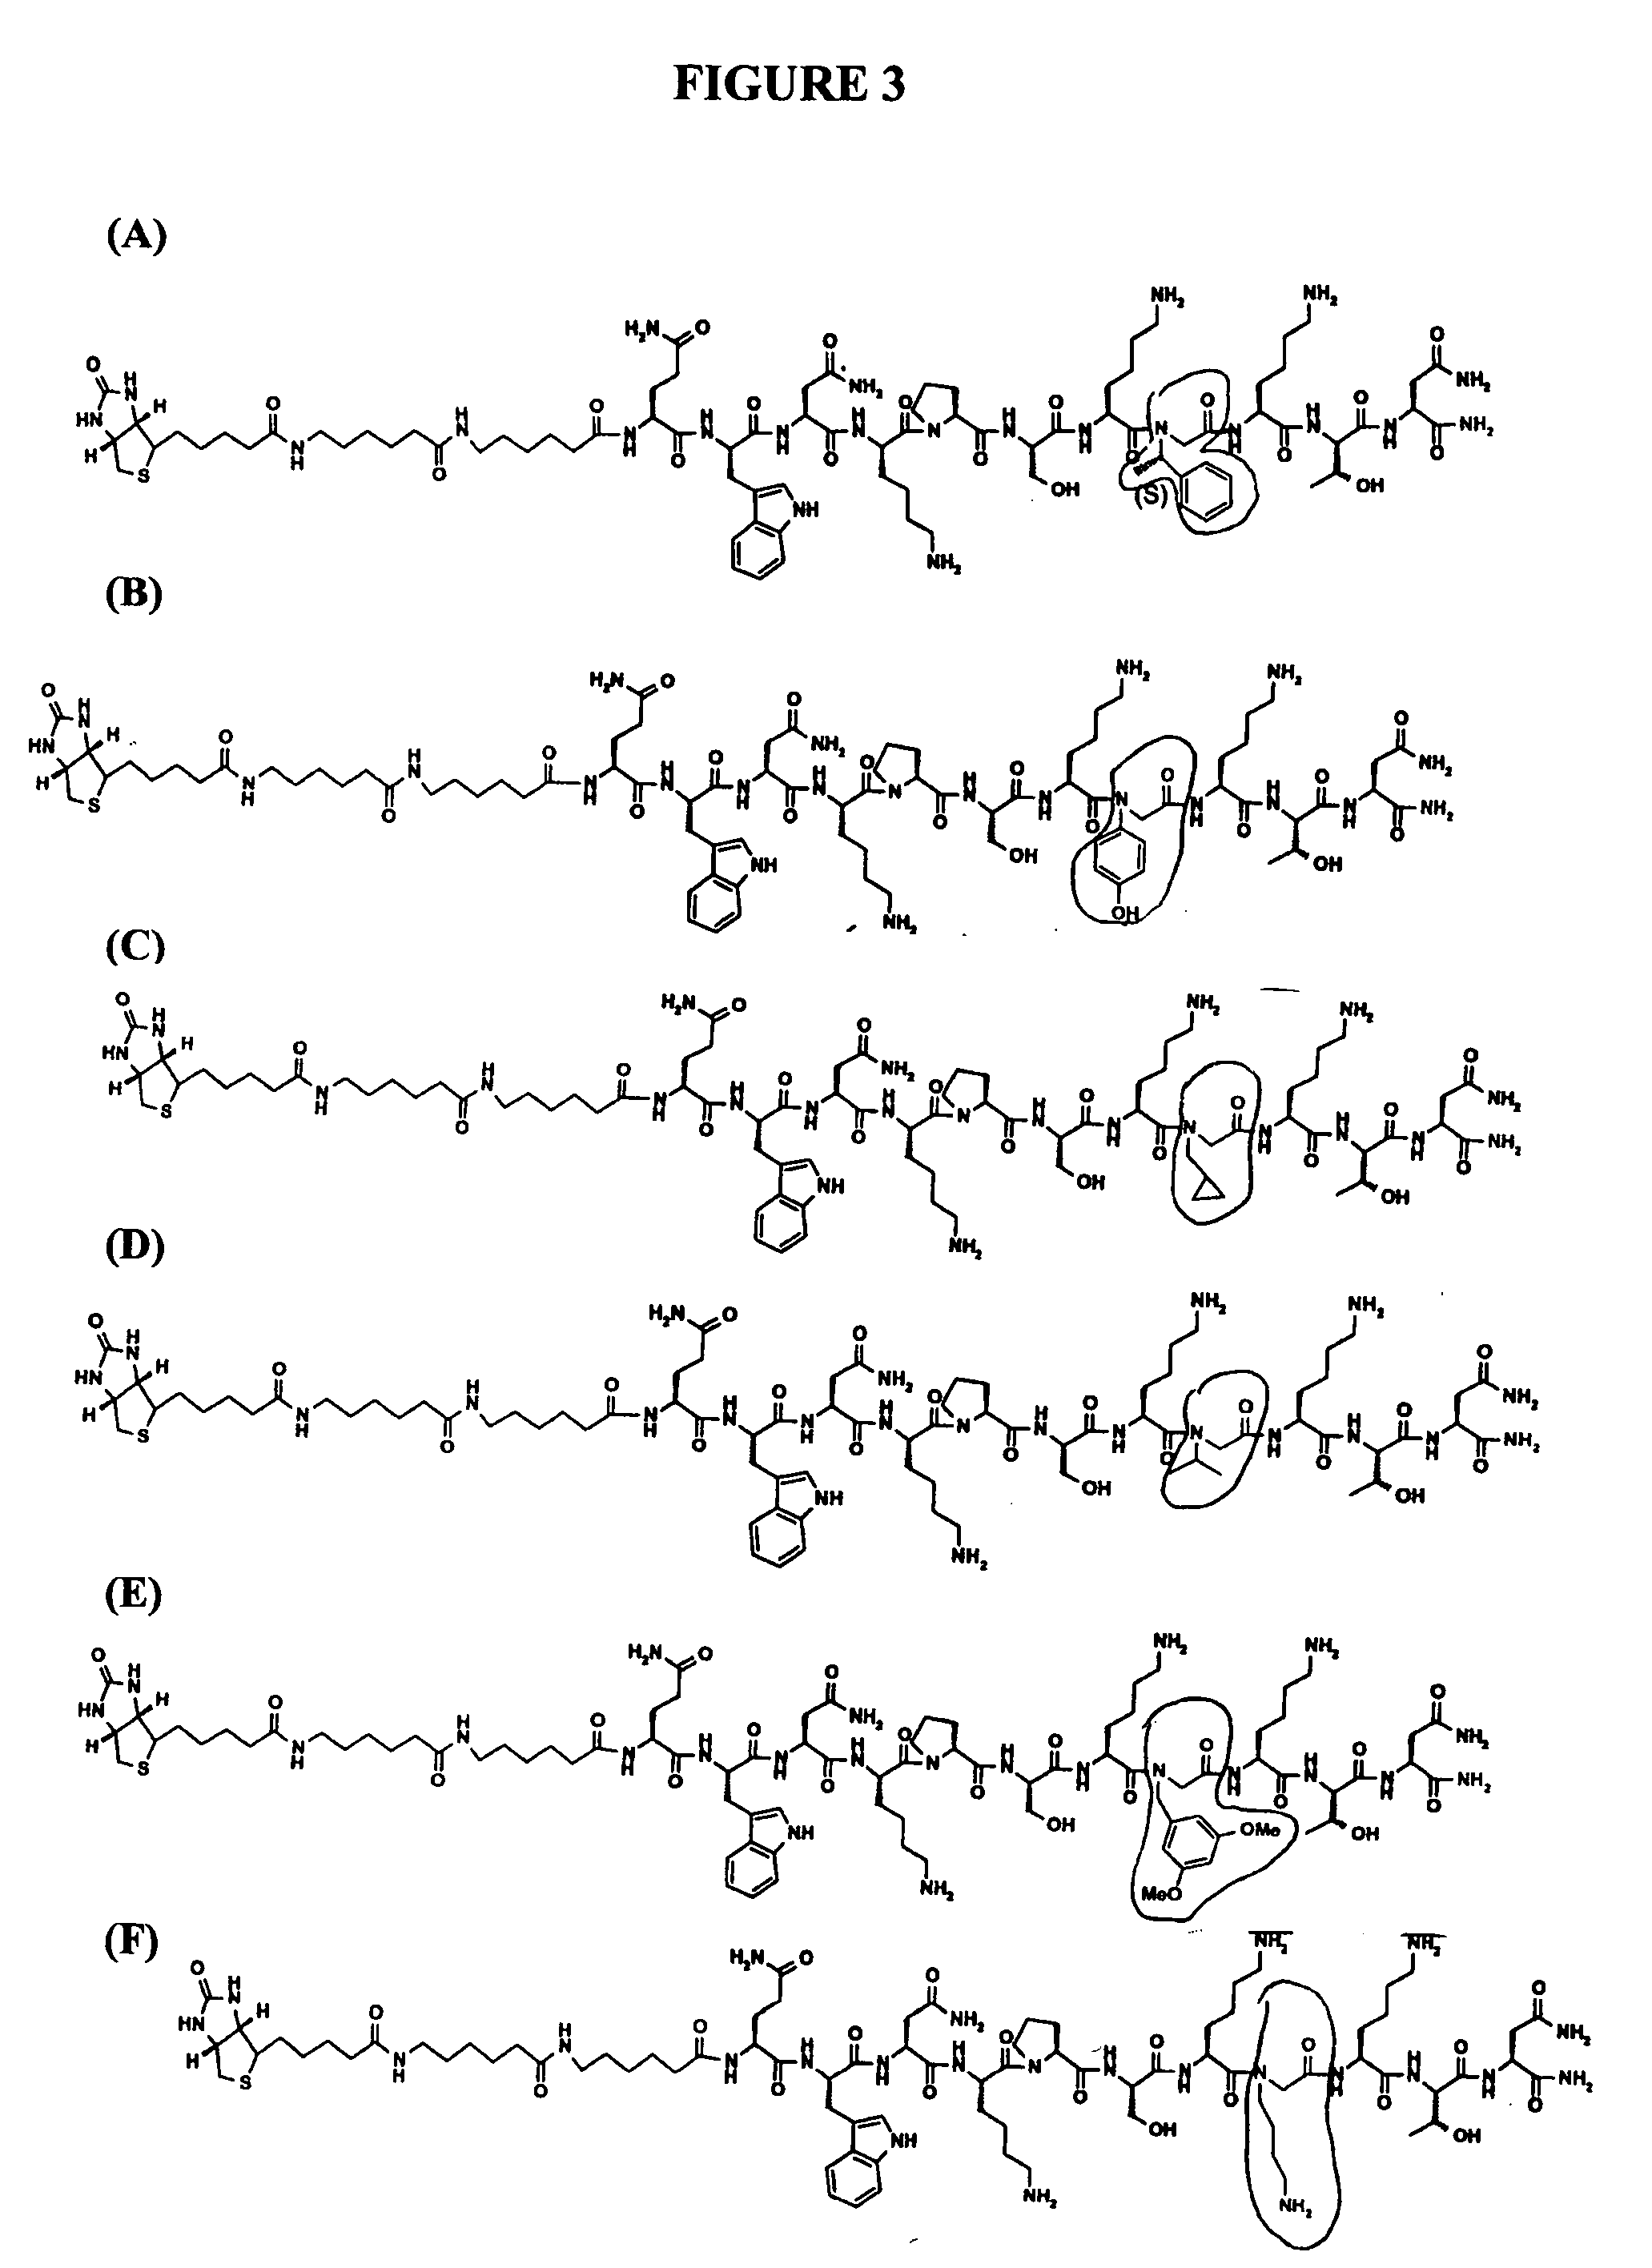 Prion-specific peptide reagents